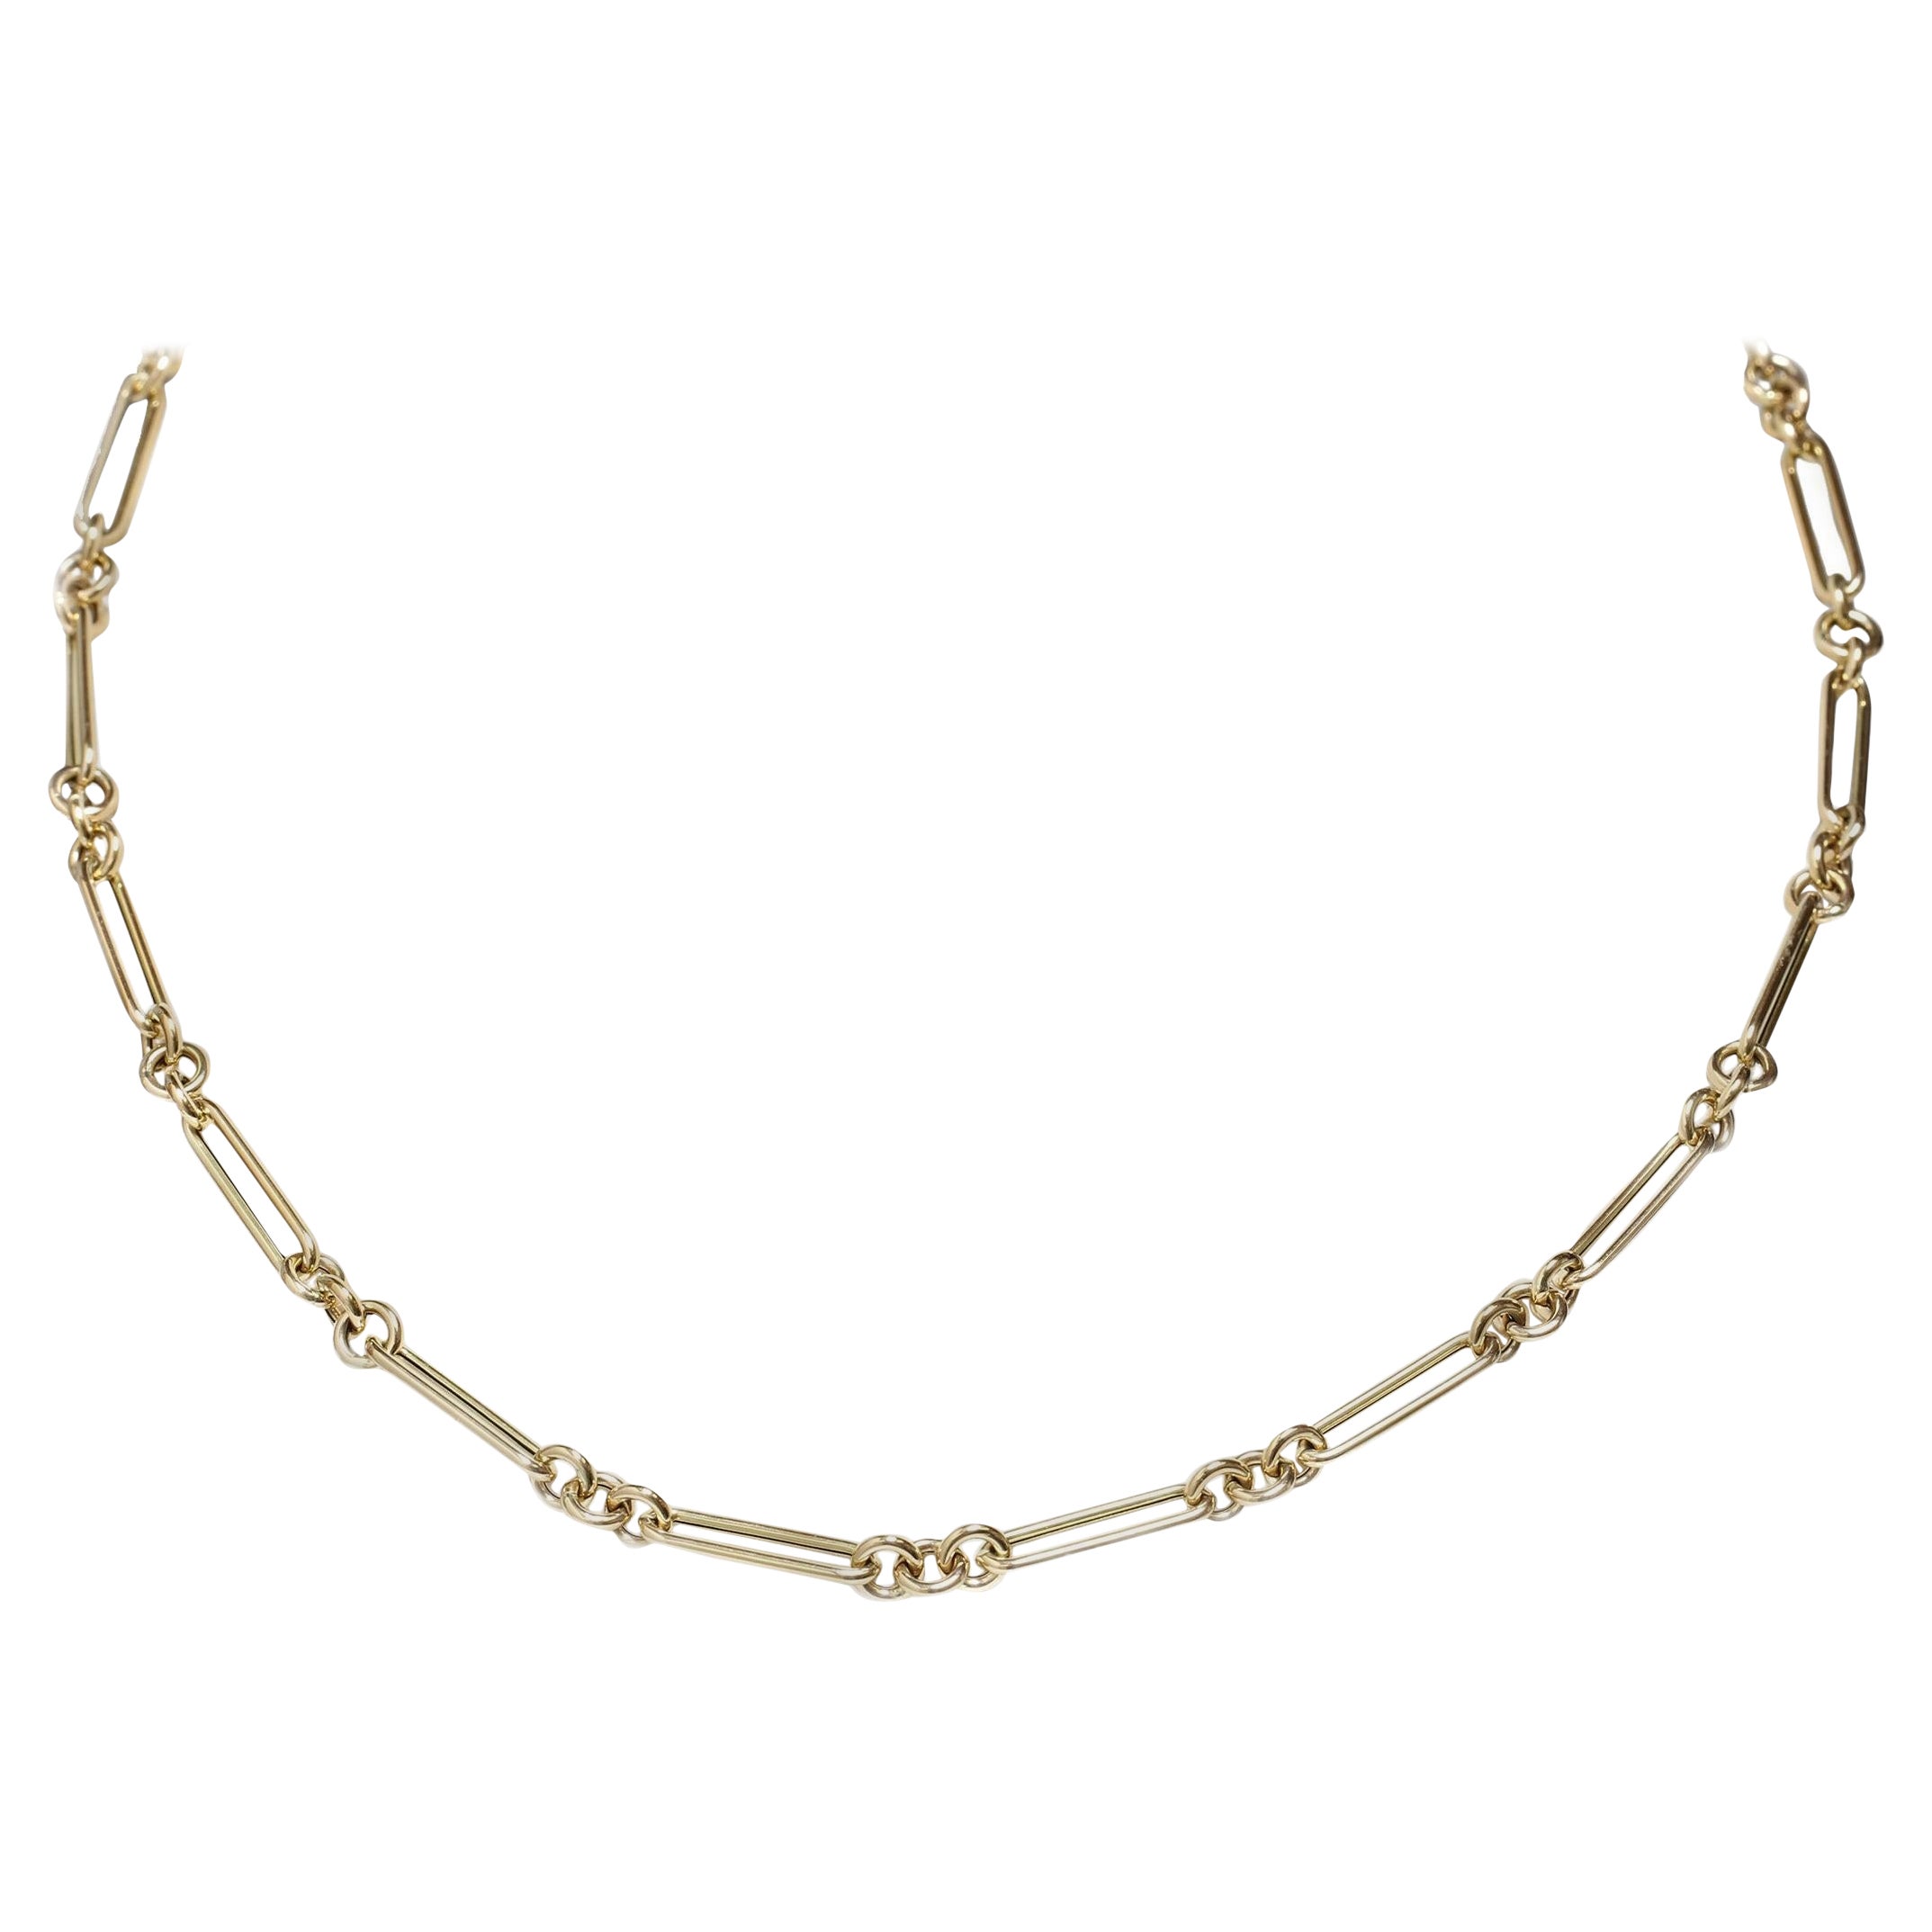 Paper Clip Link and Rolo Chain Necklace in 14K Yellow Gold - 24"